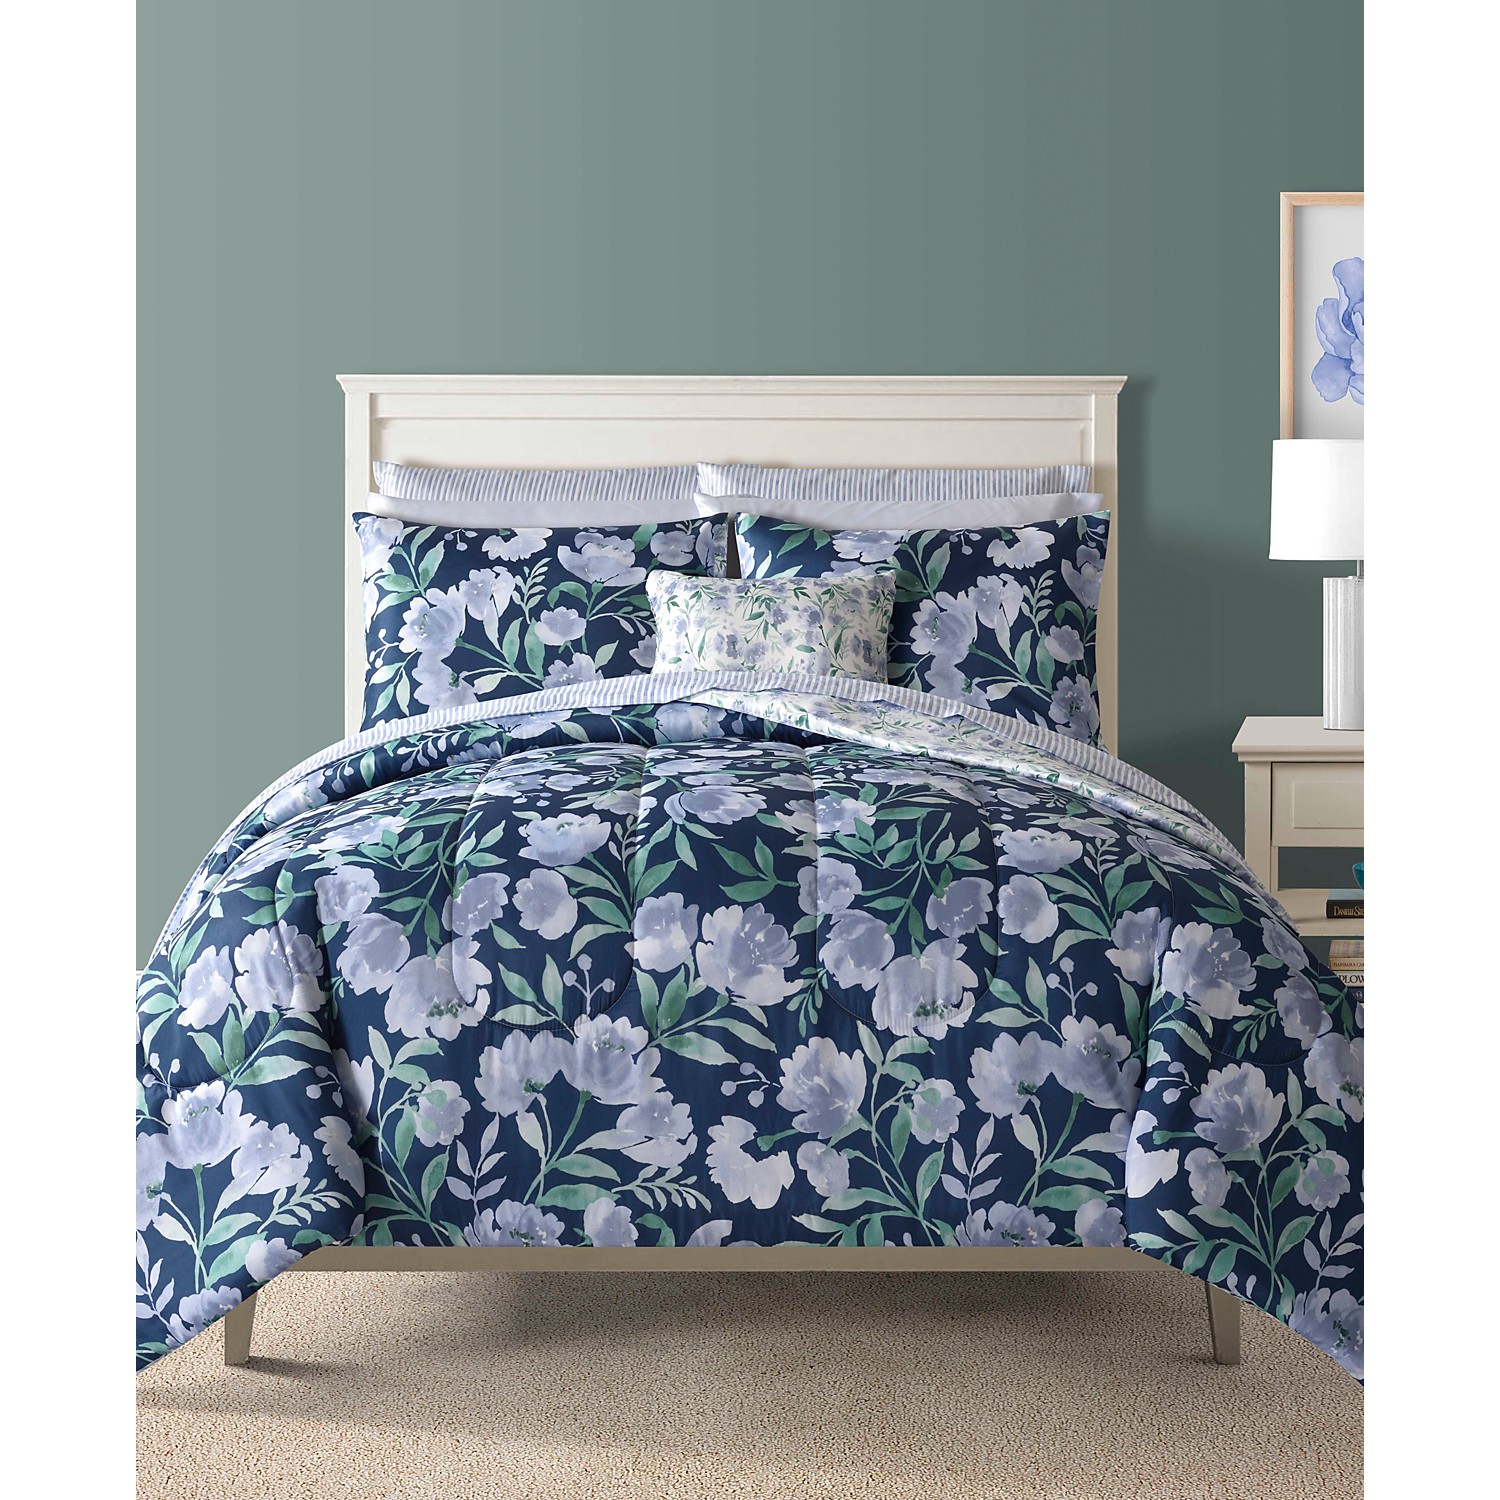 12-Piece Sunham Bella Blue Reversible Floral Comforter Set (Full Size Only) $18 + free store pickup at Macys or free ship on $25